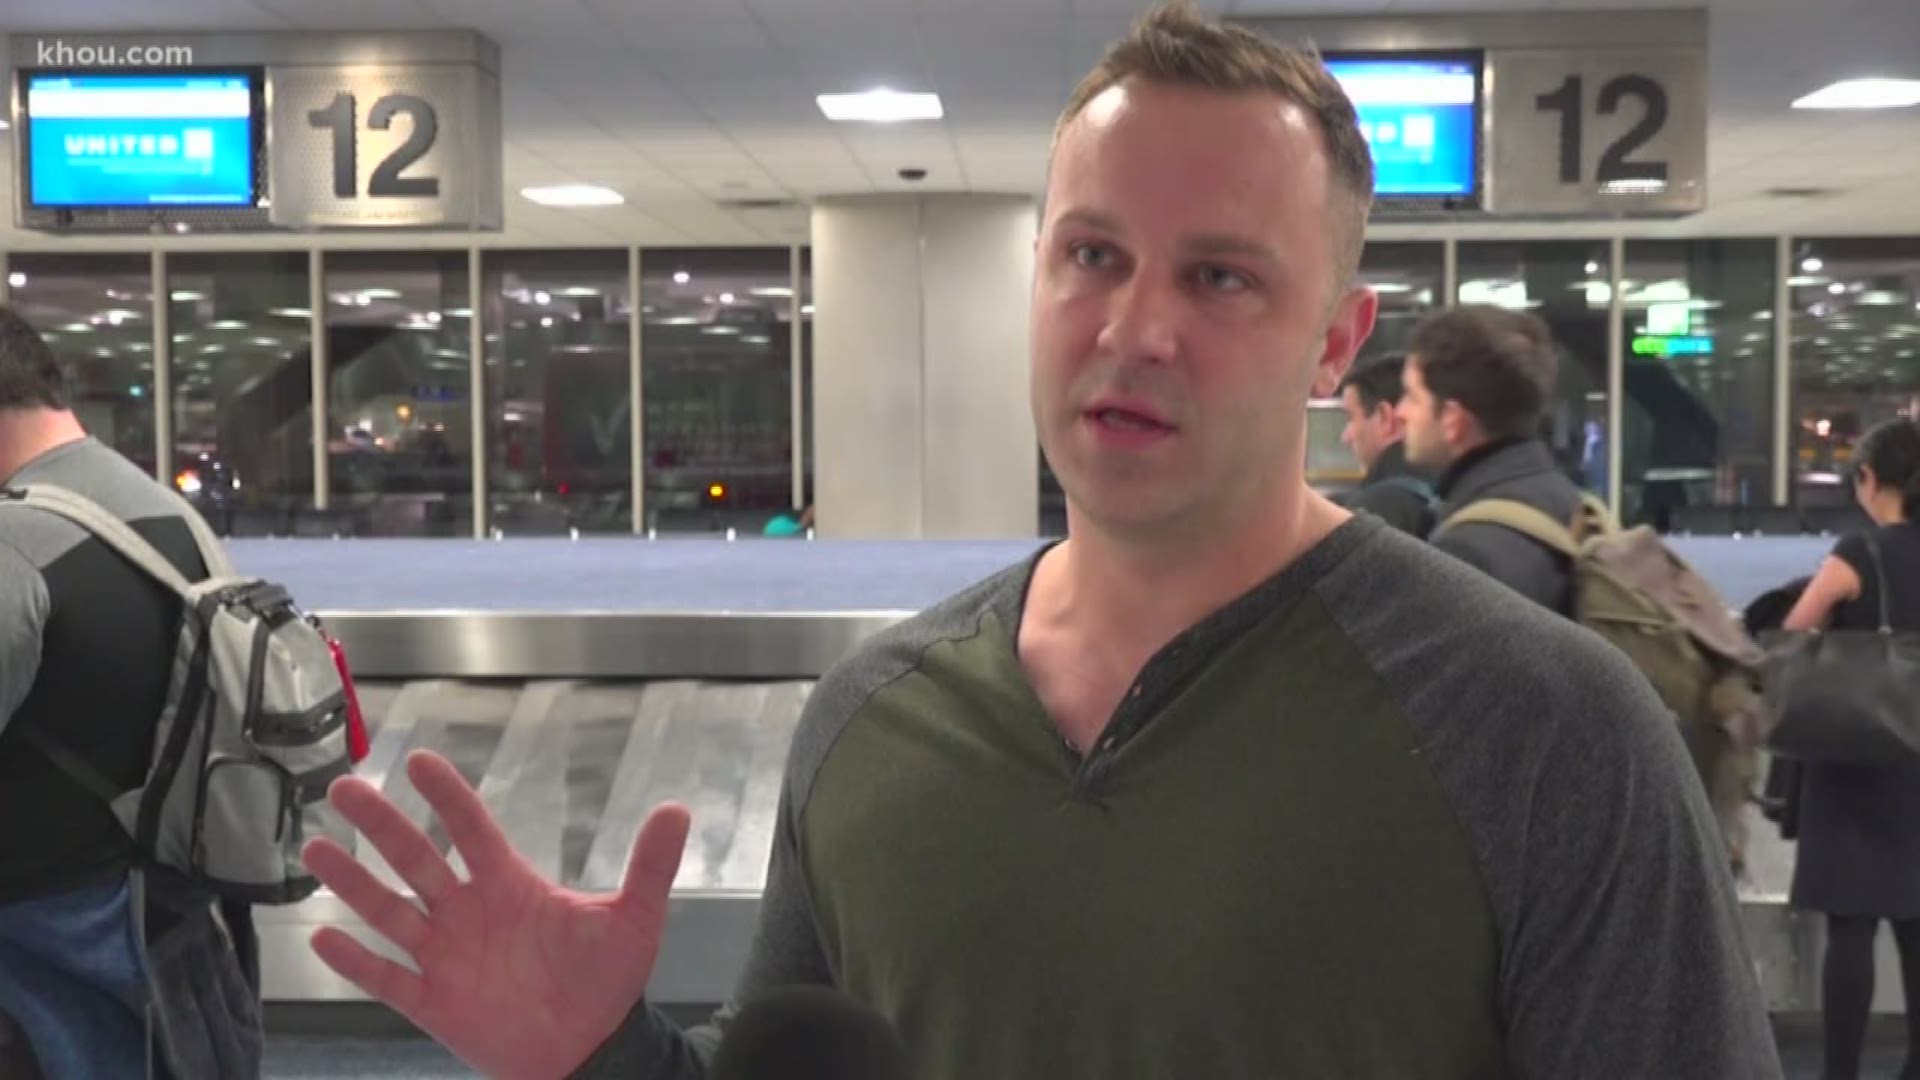 KHOU 11 reporter Adam Bennett talks to passengers on board the United plane that caught fire during a flight from New Jersey to Houston late Sunday.